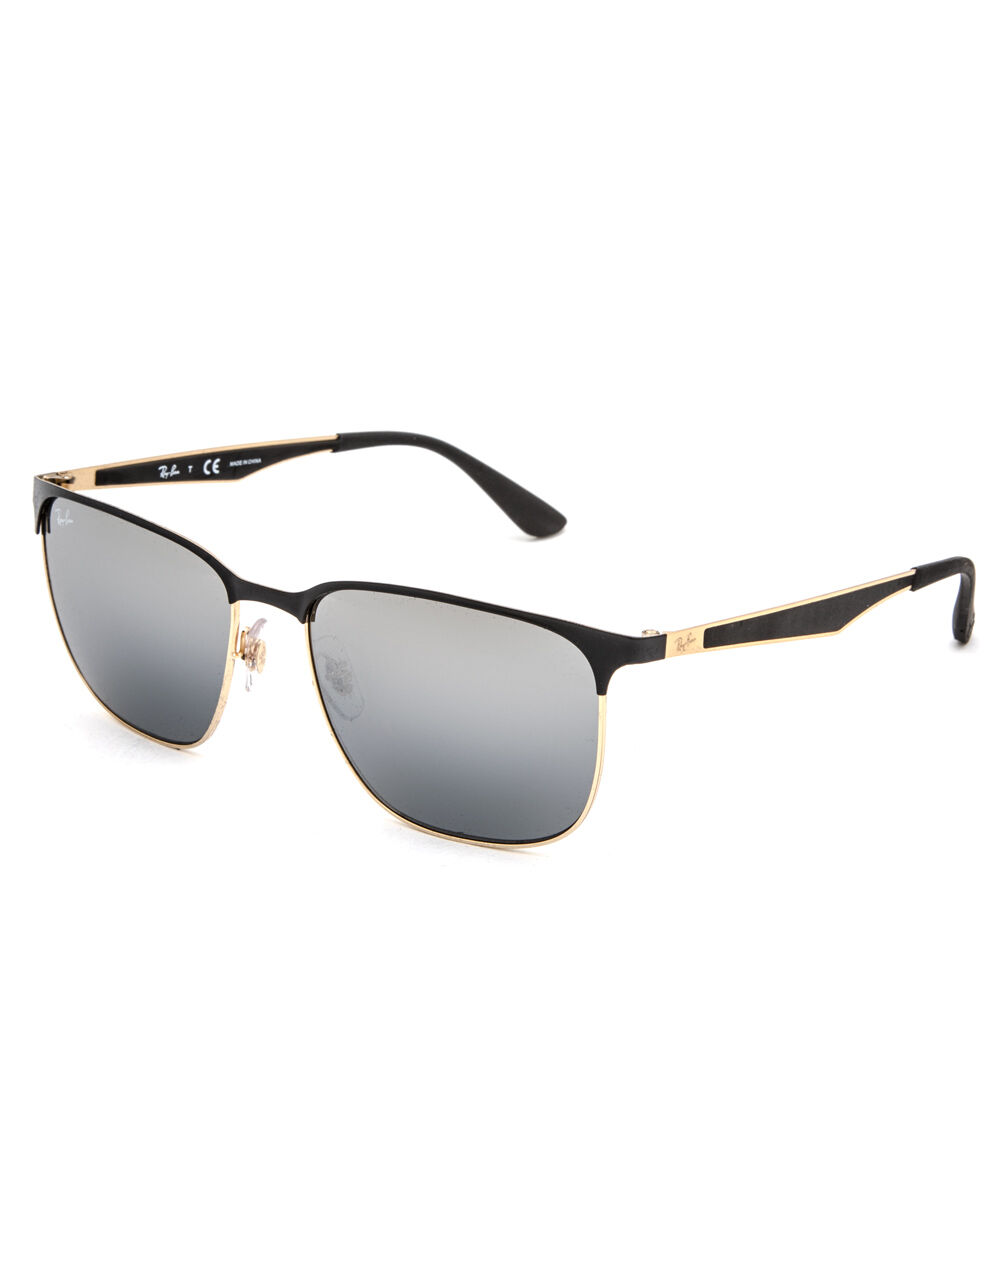 Ray-Ban Clubmaster Sunglasses: Polarized & Classic | Tillys